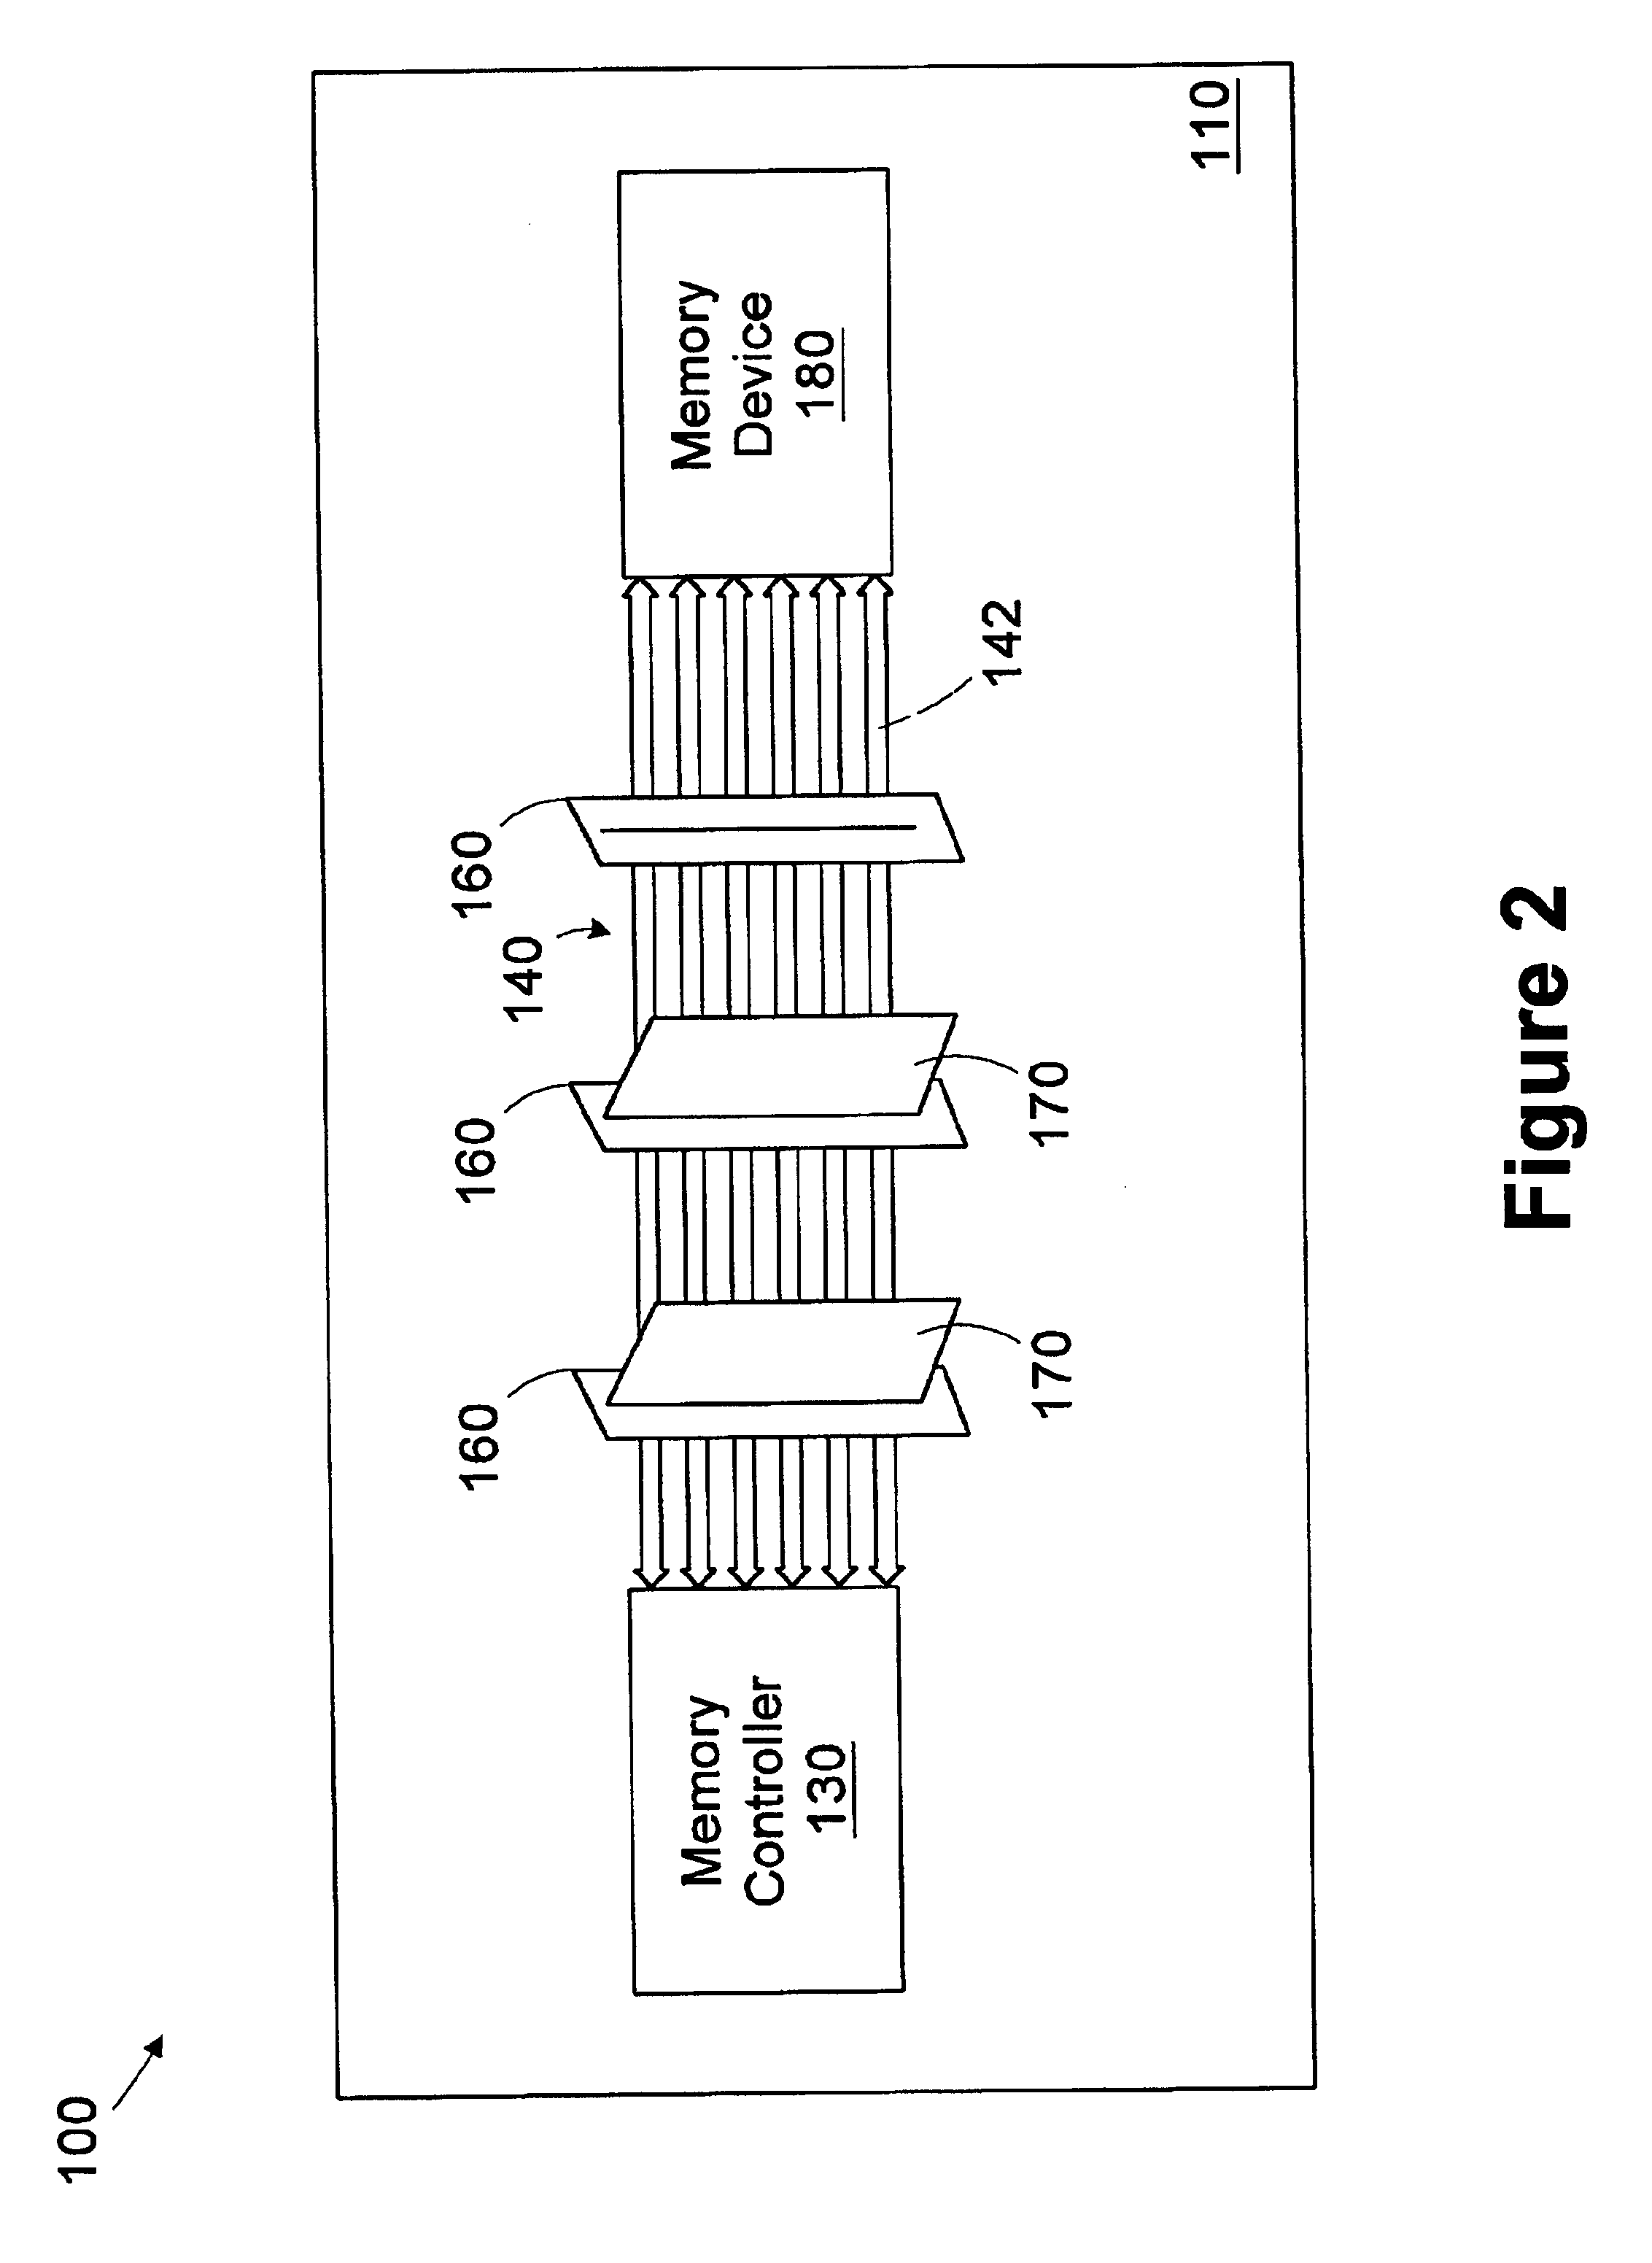 Memory module with integrated bus termination